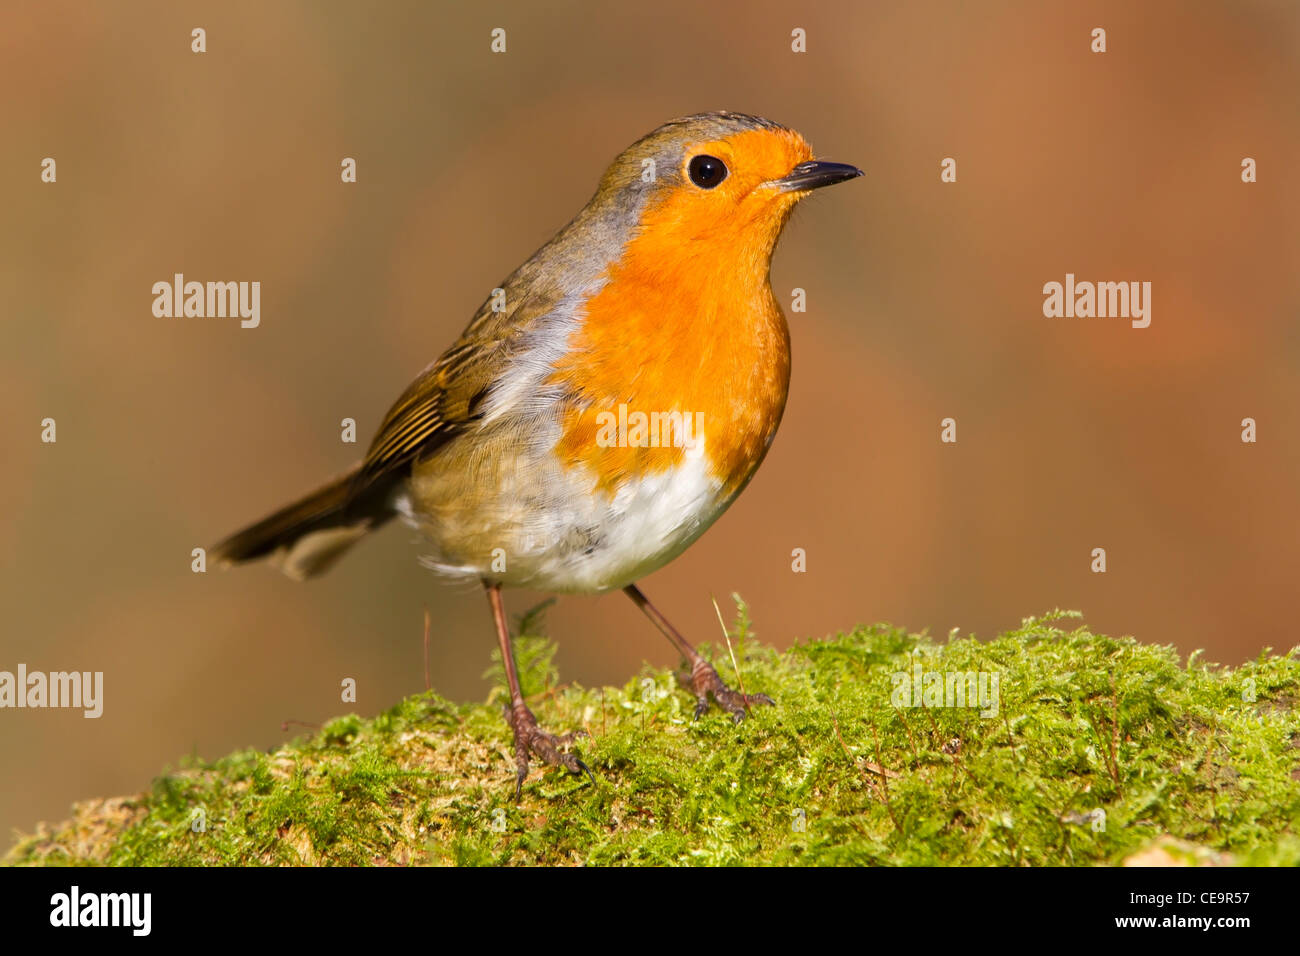 Robin perched on a moss covered log.. Stock Photo